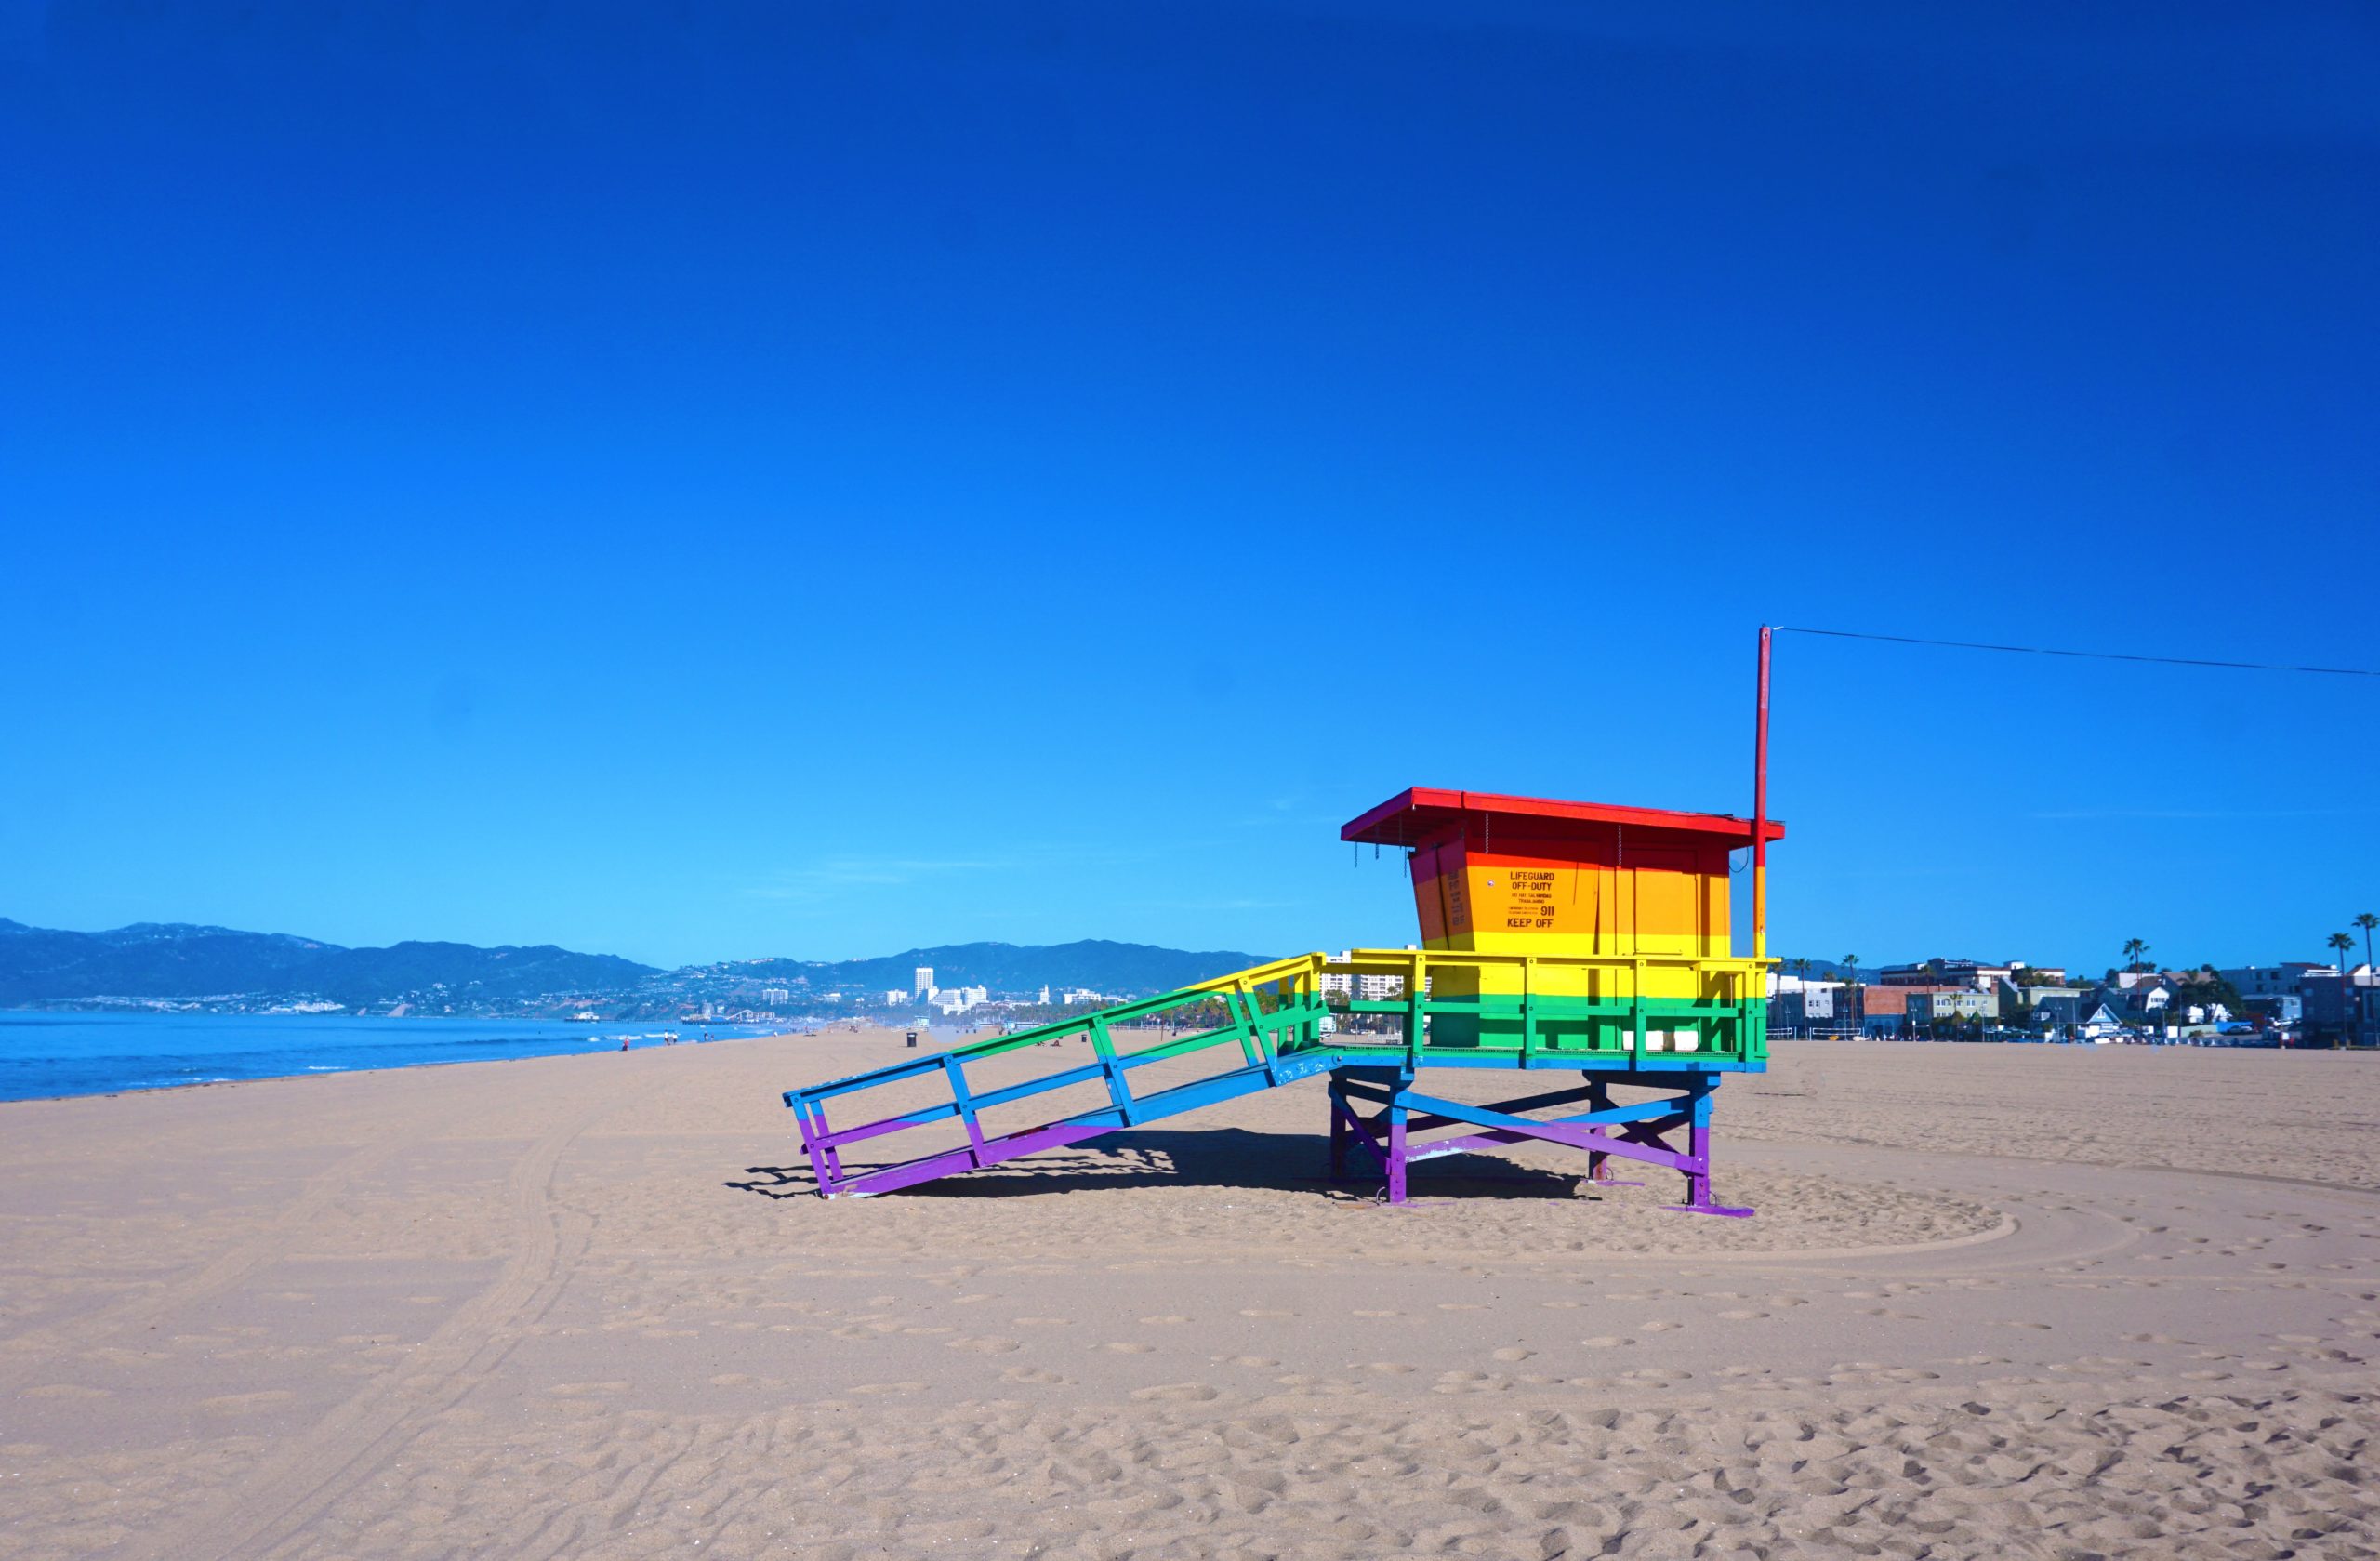 7 Awesome Things To Do In Los Angeles, California